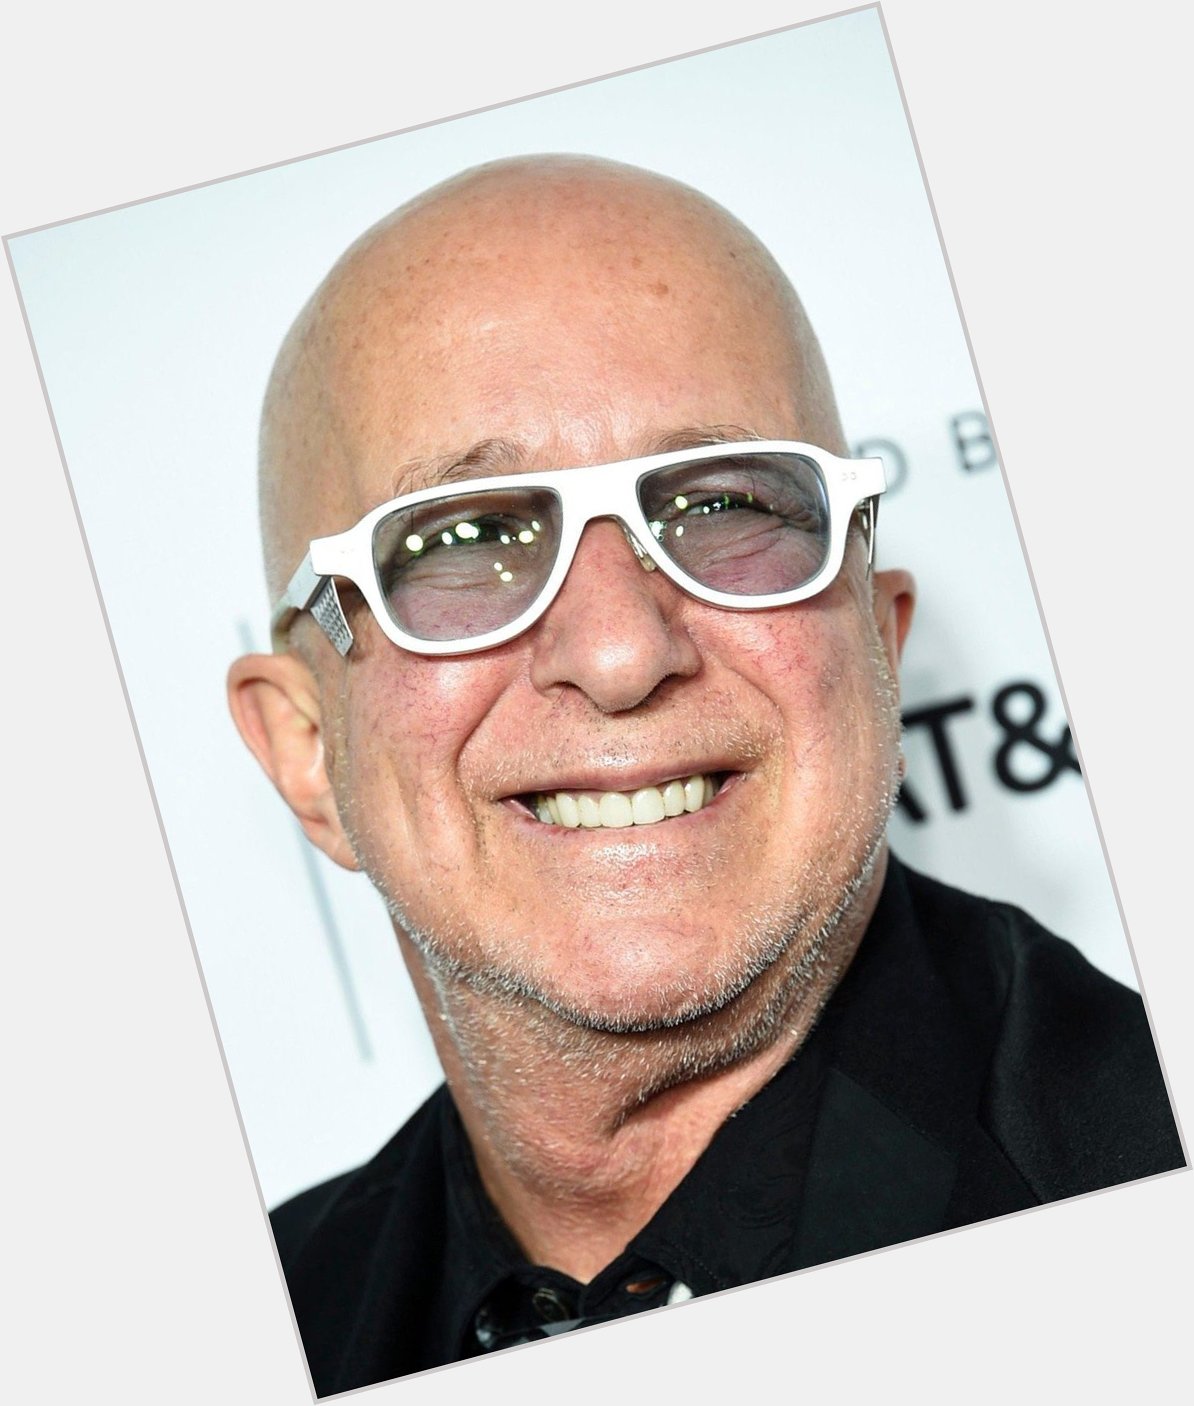 Happy Birthday to bandleader,  musician, composer, actor, author and comedian Paul Shaffer born on November 28, 1949 